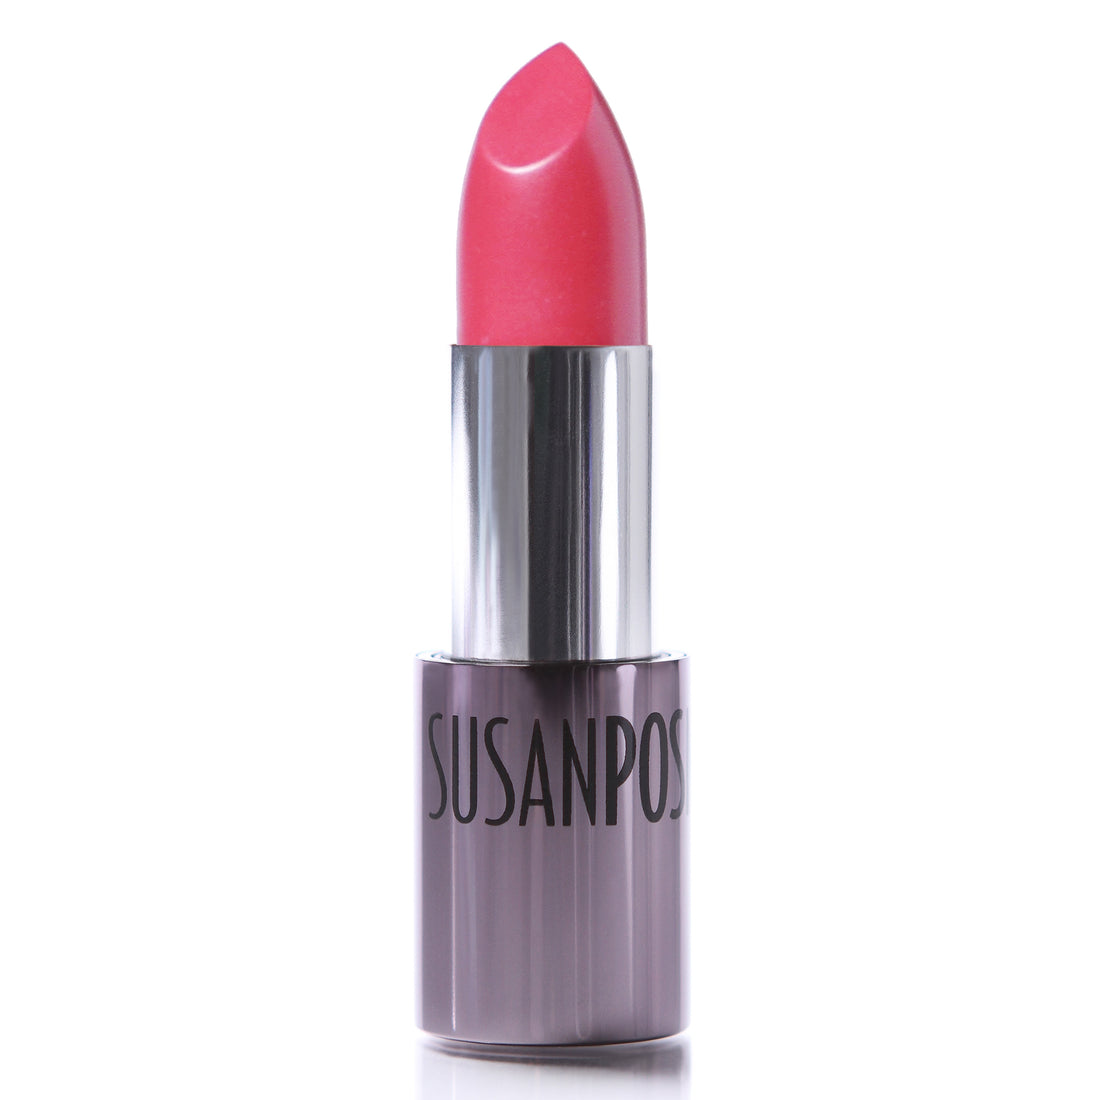 Shanghai Pink ColorEssential Lipstick by Susan Posnick Cosmetics